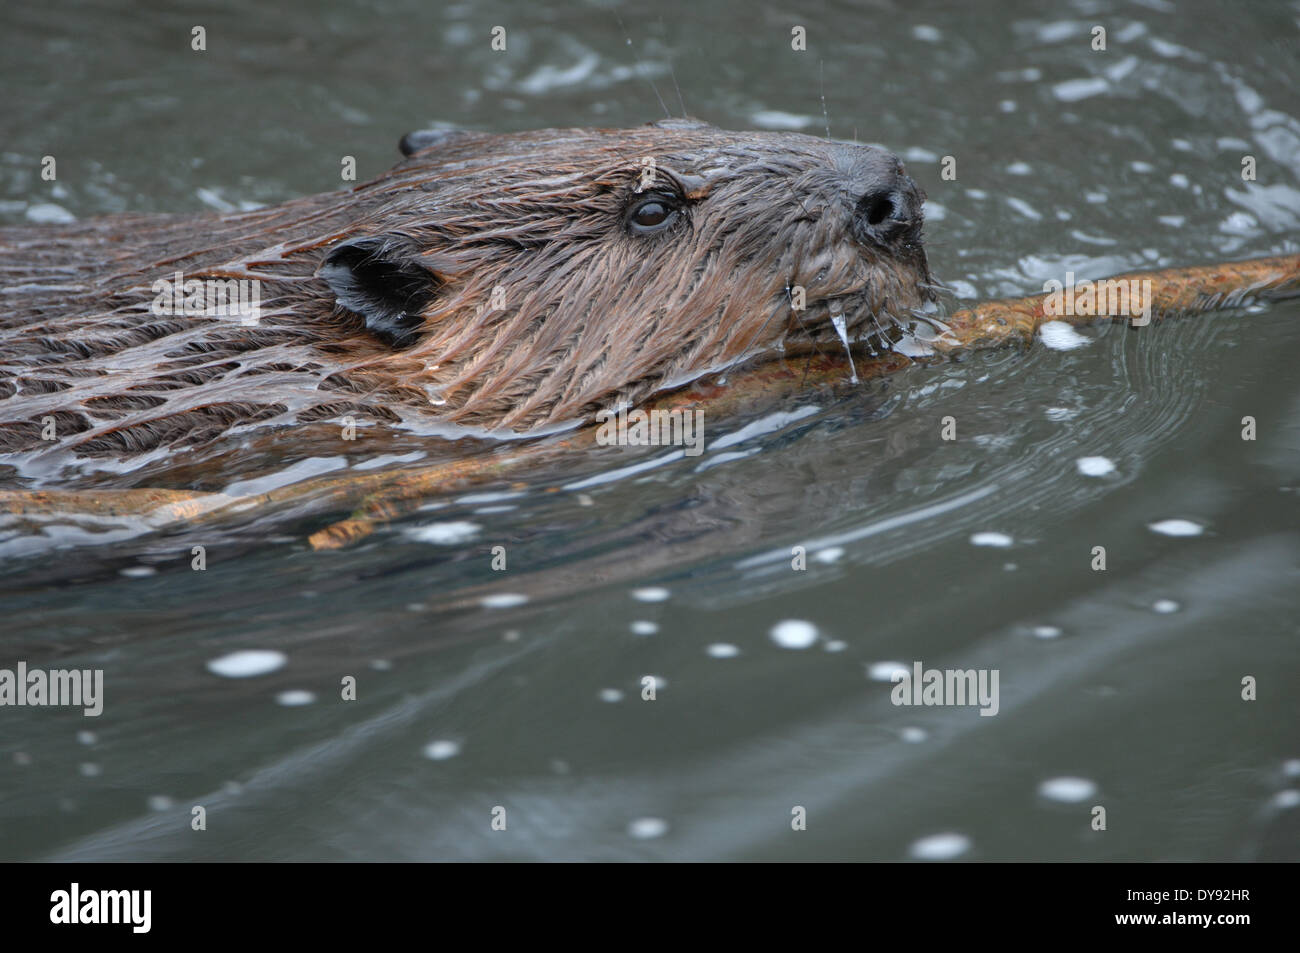 Beavers, rodents, Castor canadensis, water, animal, animals, Germany, Europe, Stock Photo